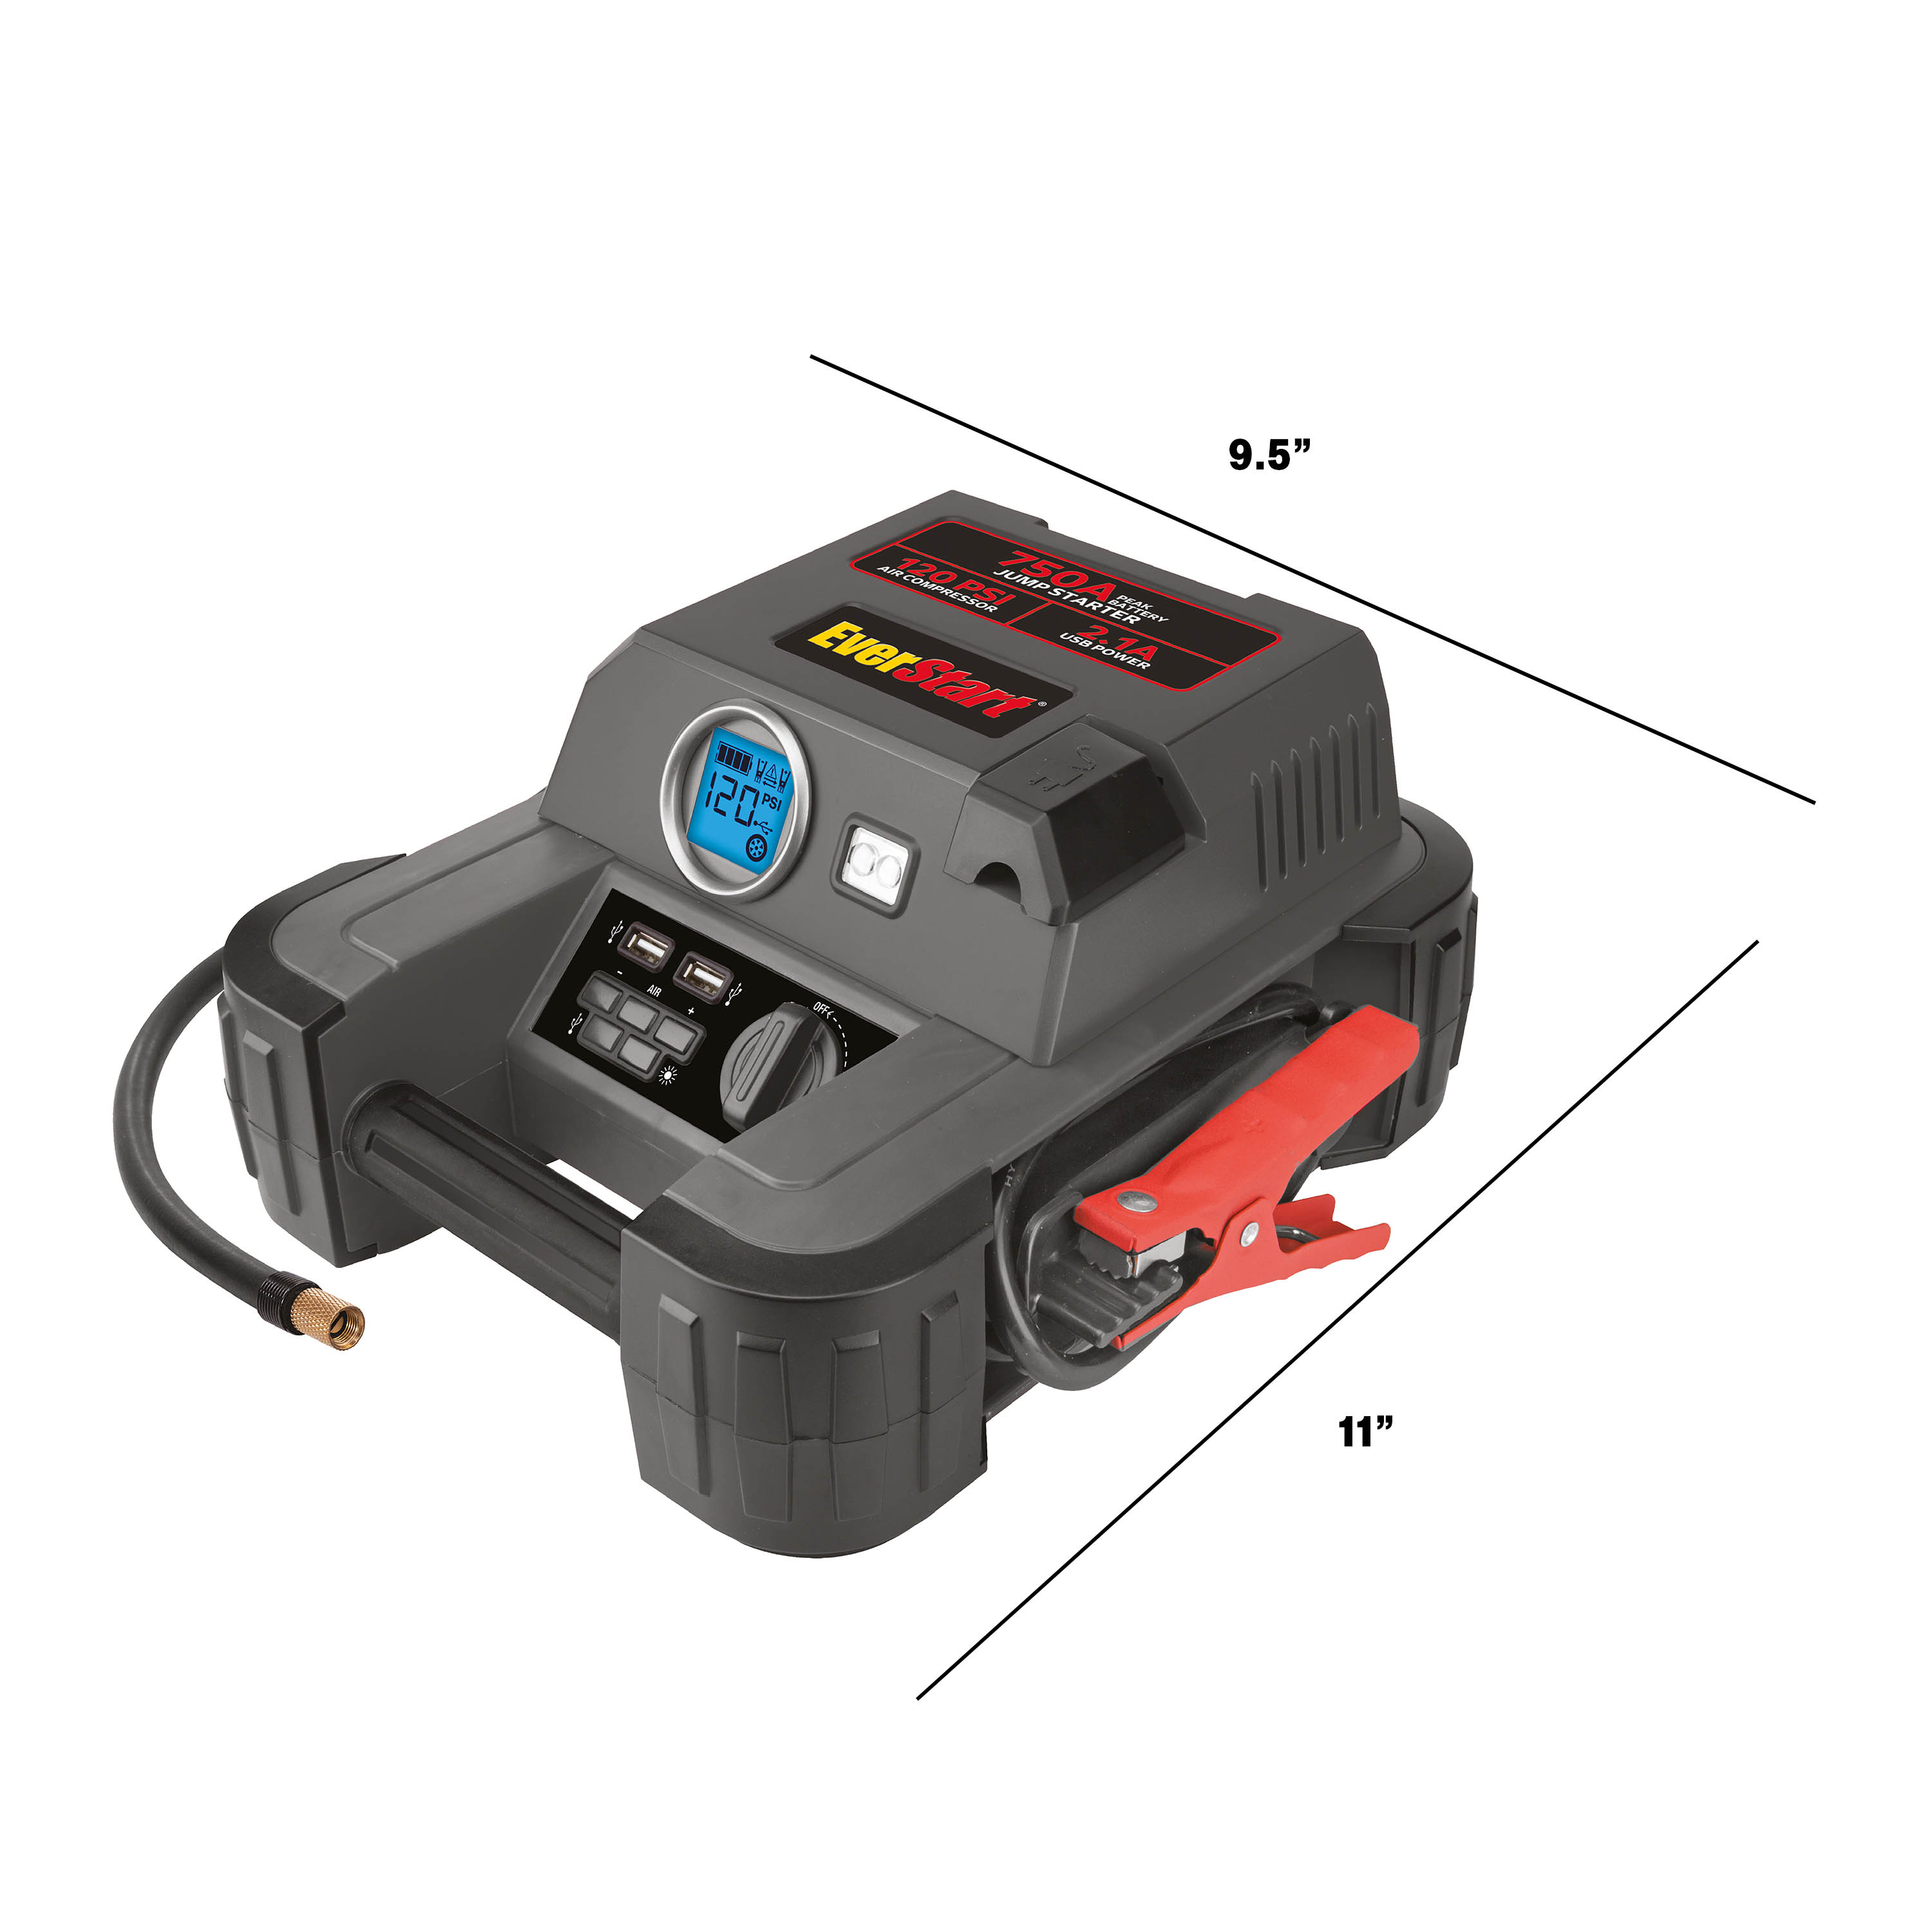 EverStart 750A Jump Starter with Reverse Polarity Alarm, 120 PSI Digital Compressor, Clamps Included - image 4 of 6